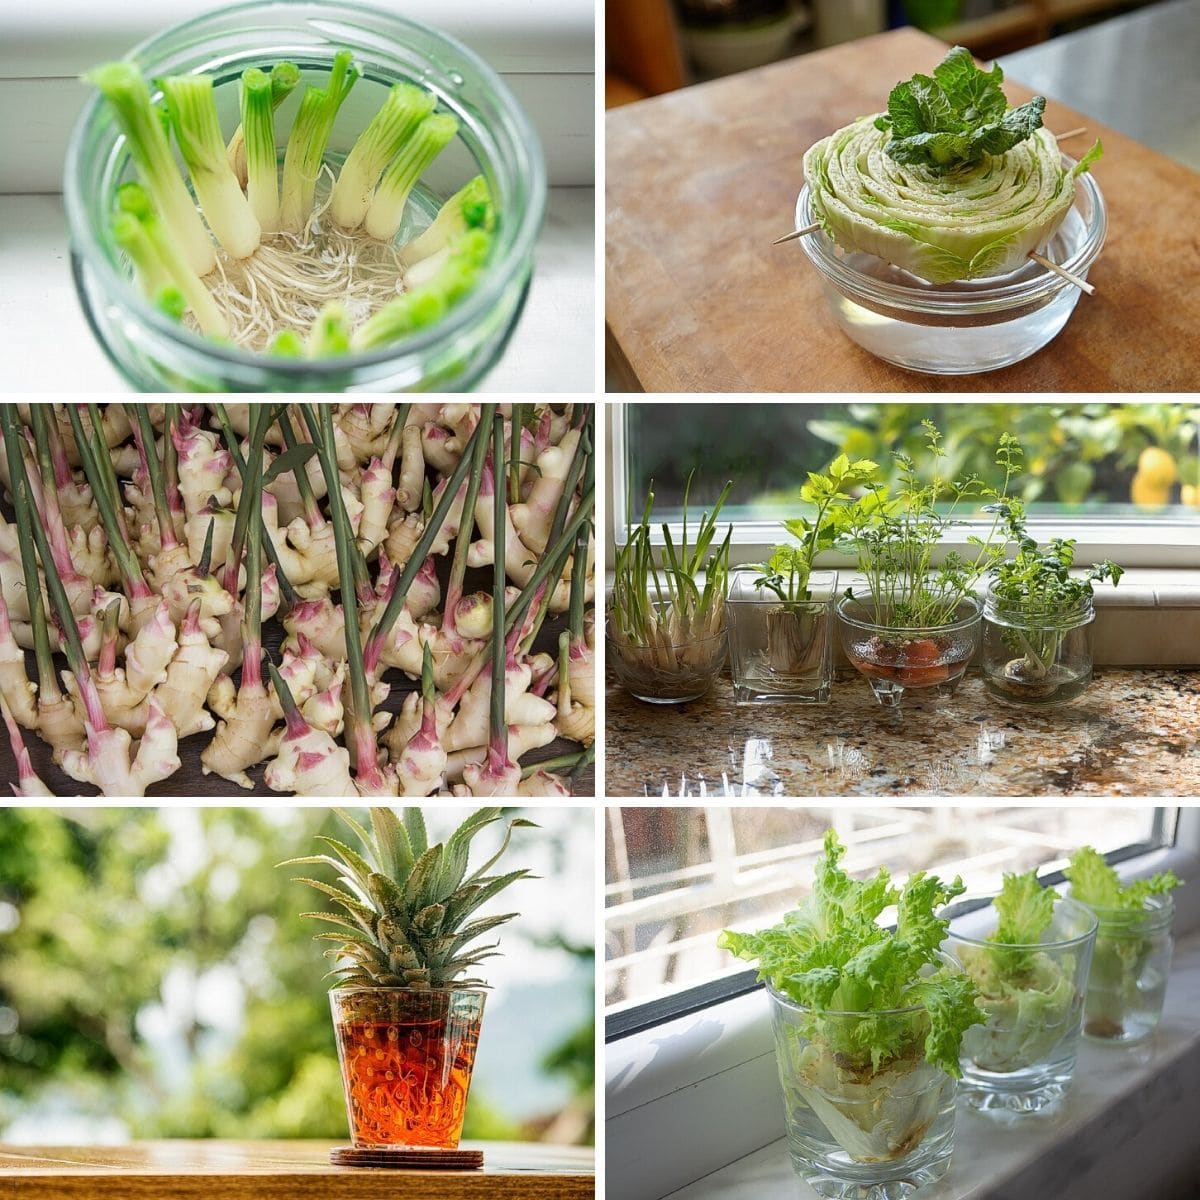 Collage photo of things grown in water